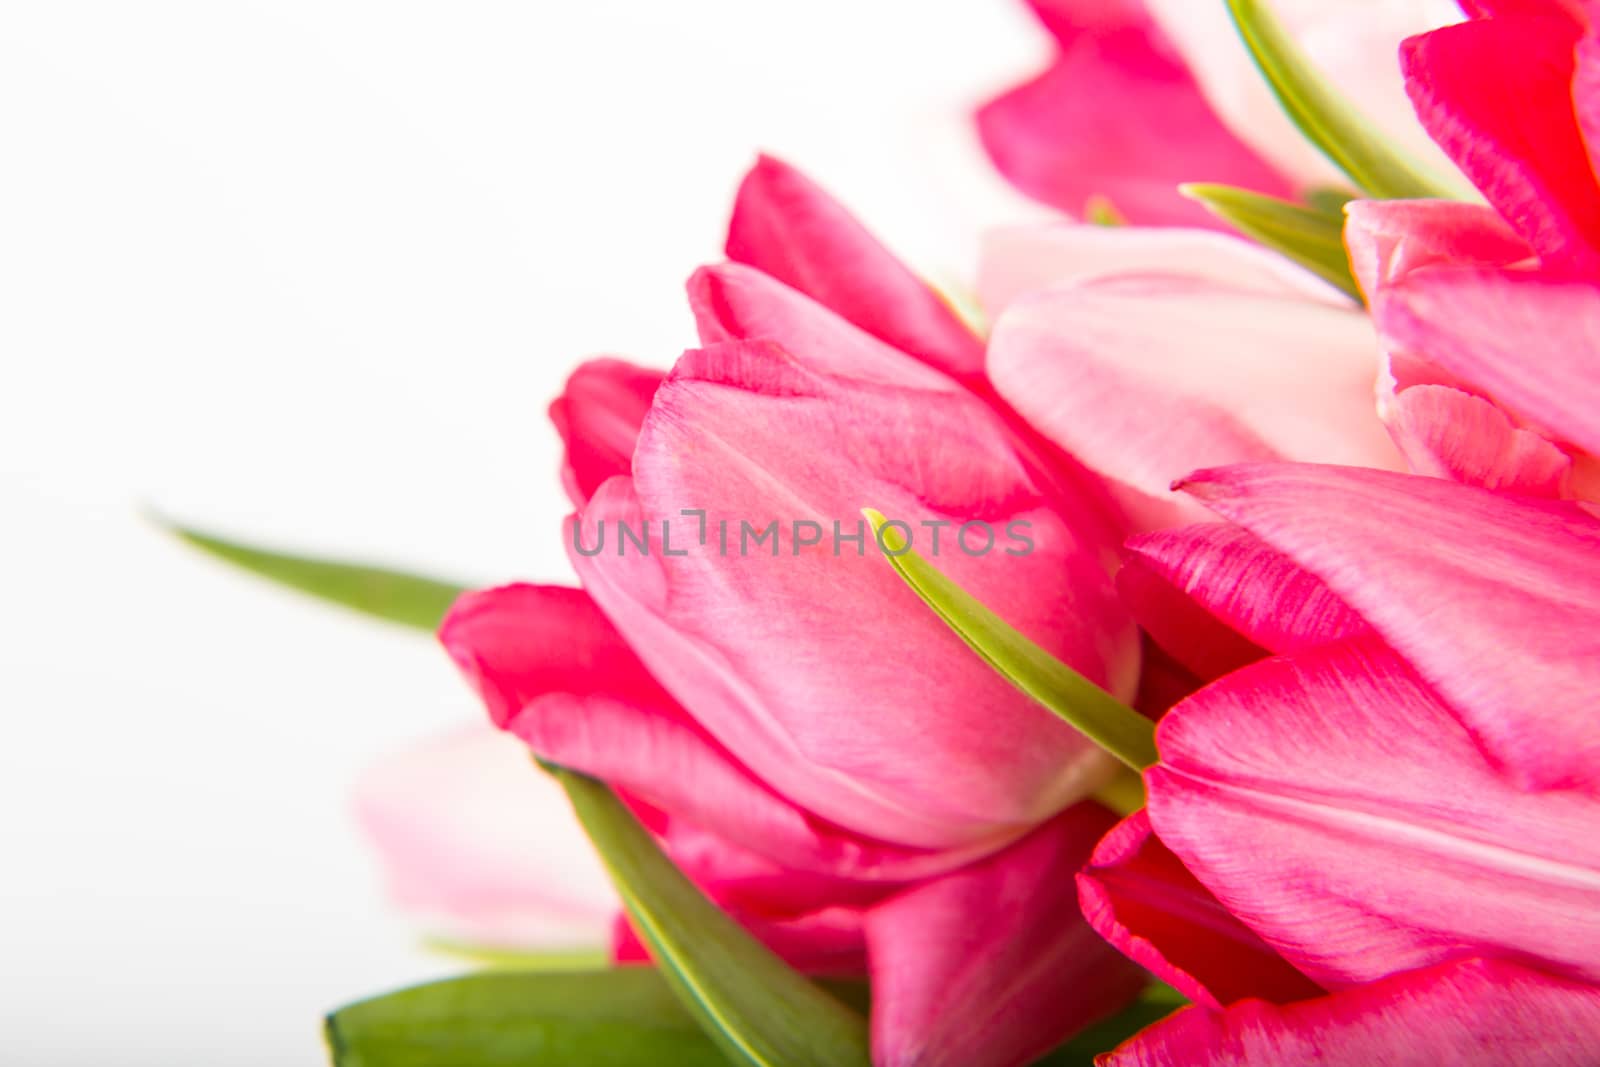 Spring Fresh multicolored tulips isolated on white background. Congratulation. Valentine's Day, spring, Easter. Space for text.